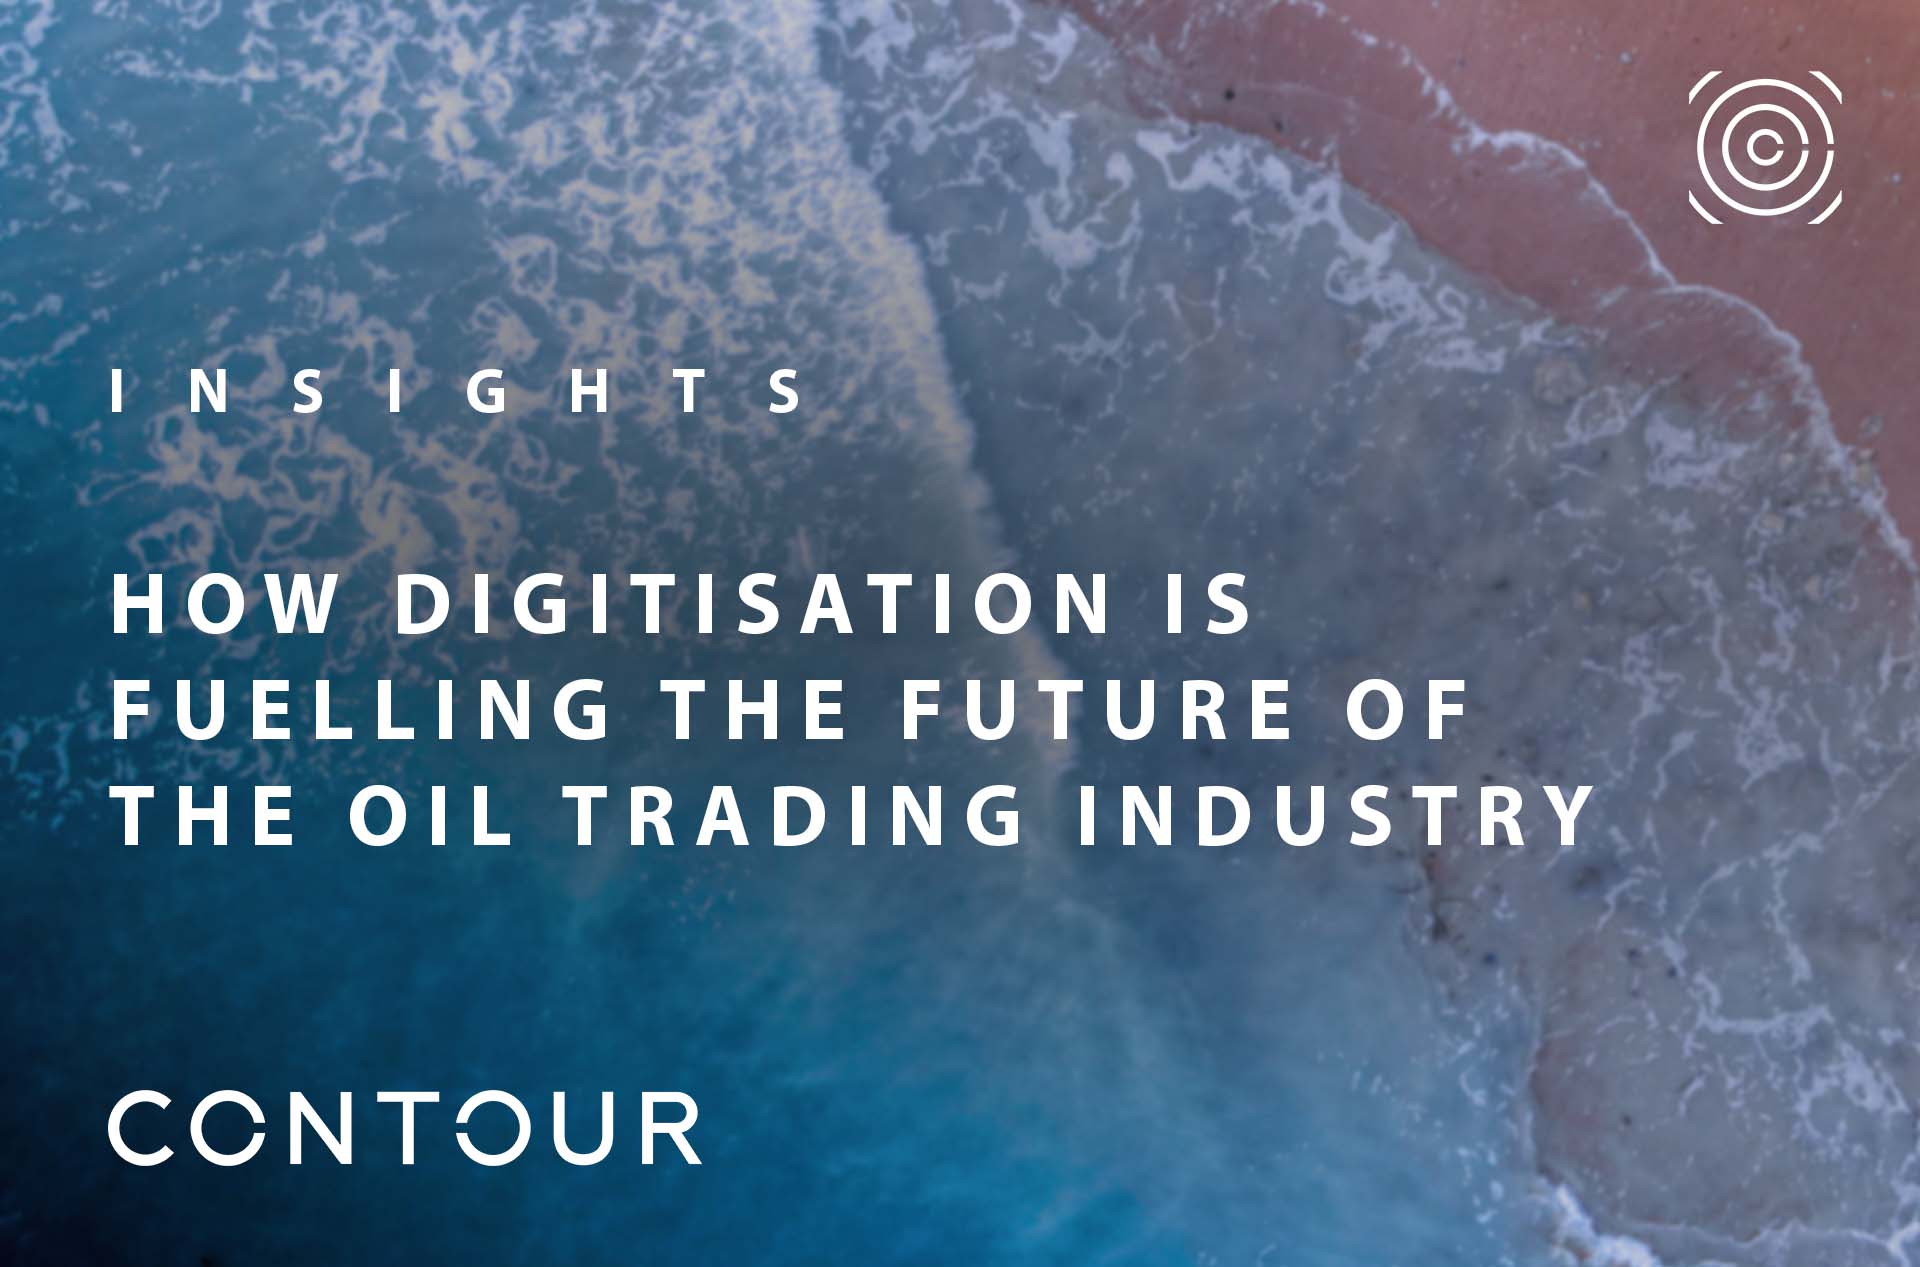 Standards, solutions and supply chains: How digitisation is fuelling the future of the oil trading industry